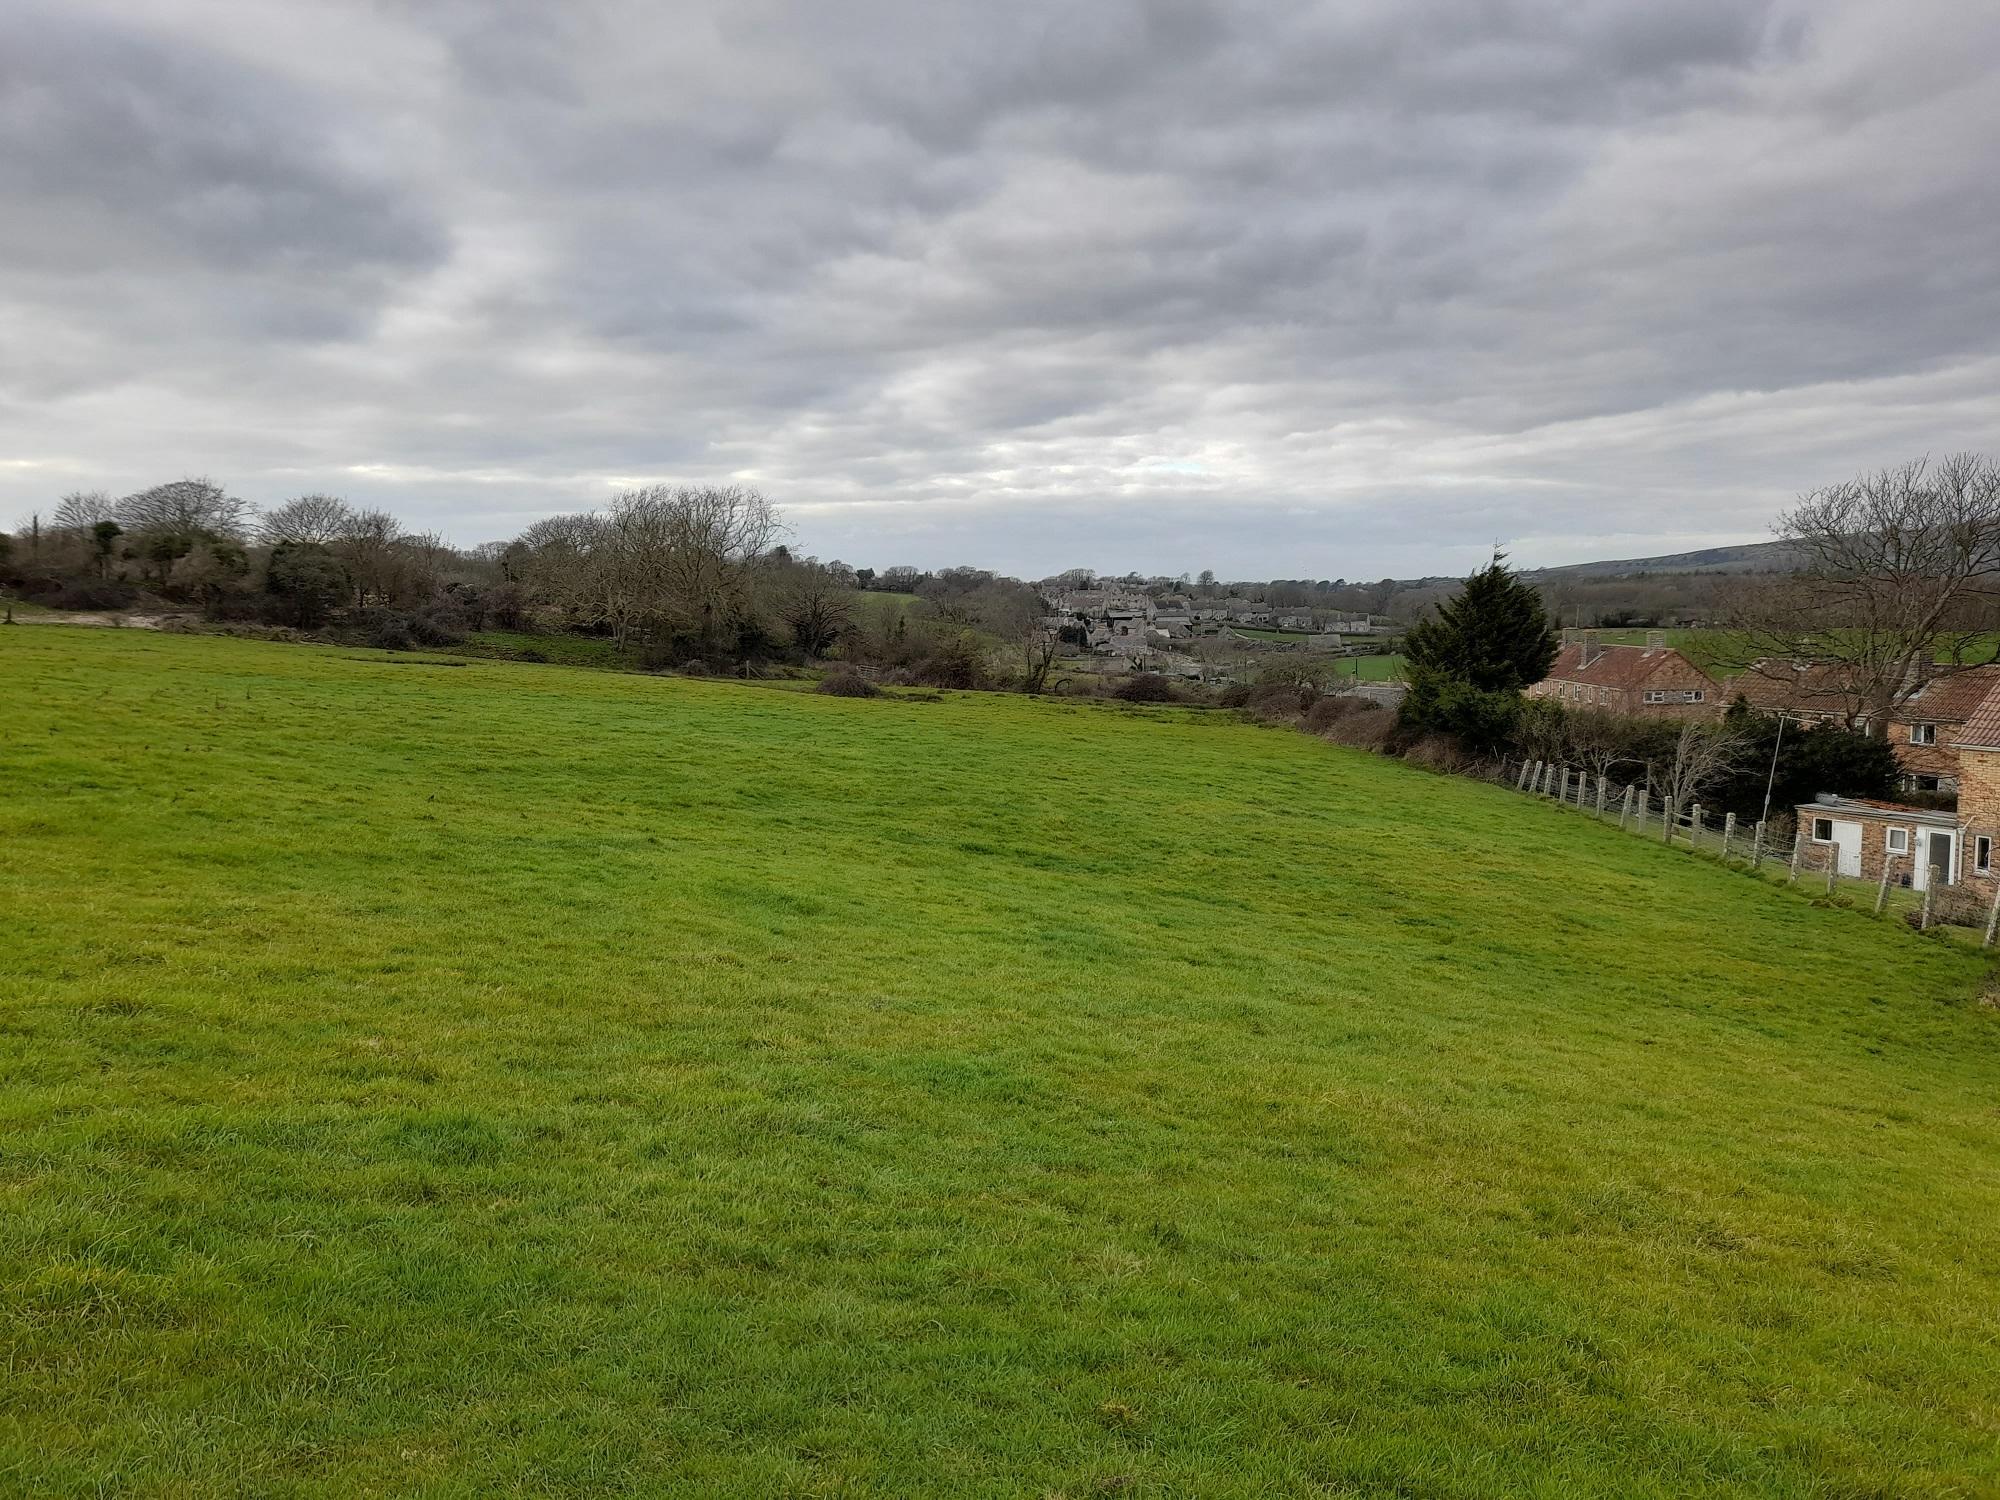 Looking across a large green field on a winter day to the grey stone buildings of Langton Matravers